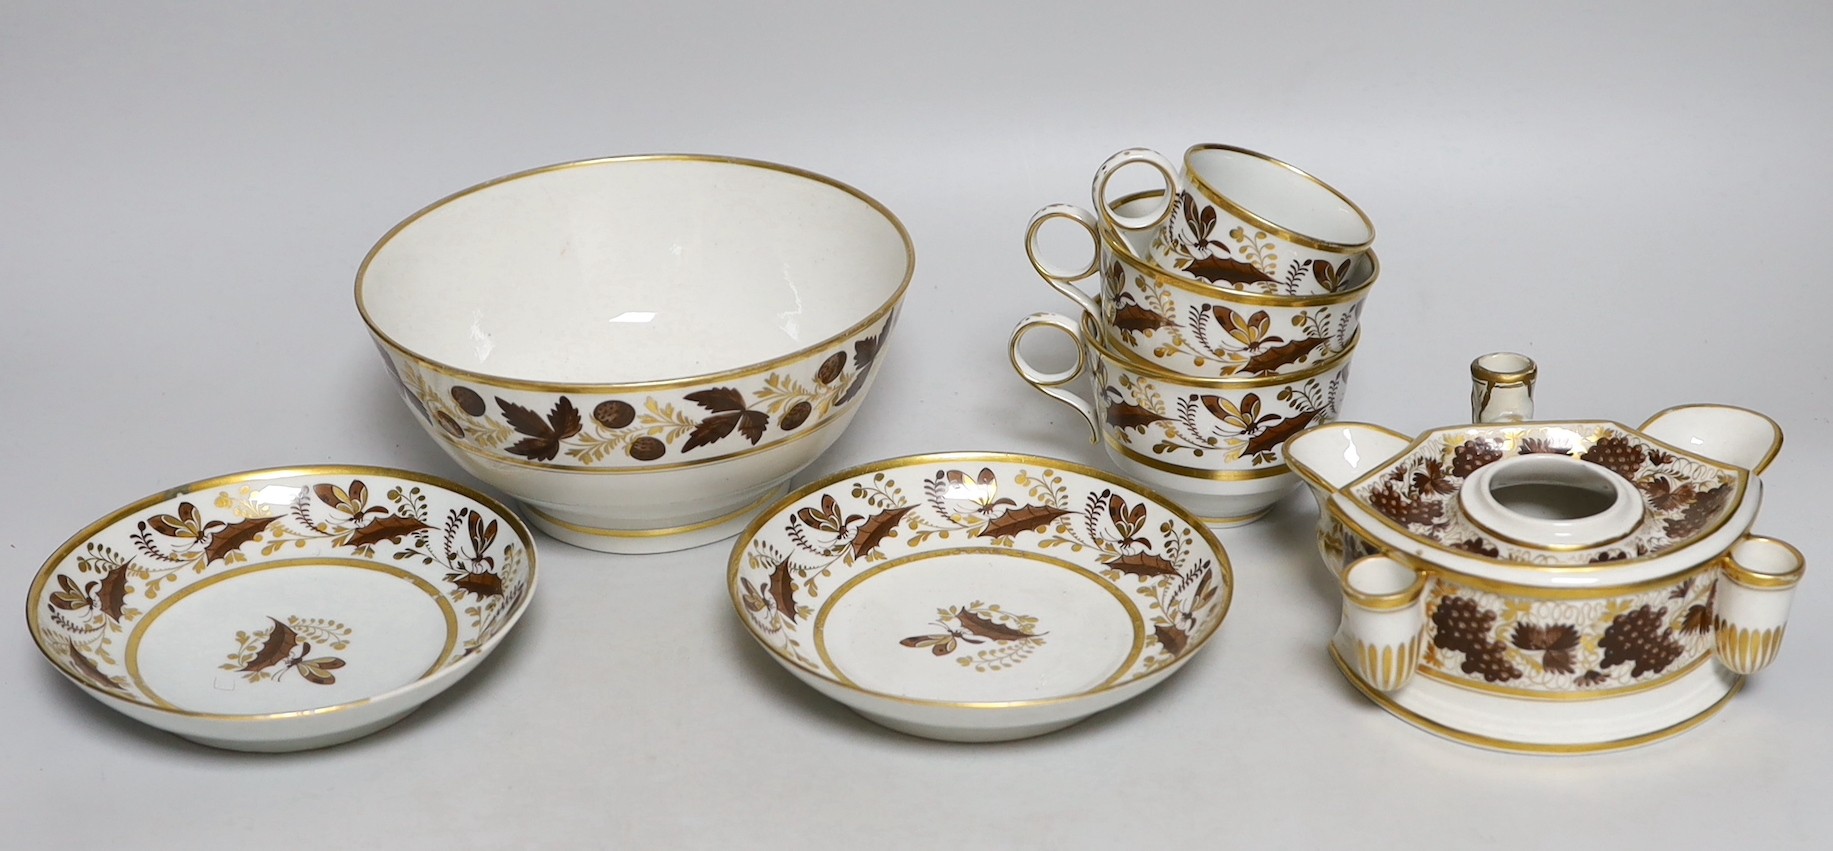 Flight and Barr, Worcester brown enamelled and gilded inkstand, two trios and a similar slops bowl, c.1795, incised B marks